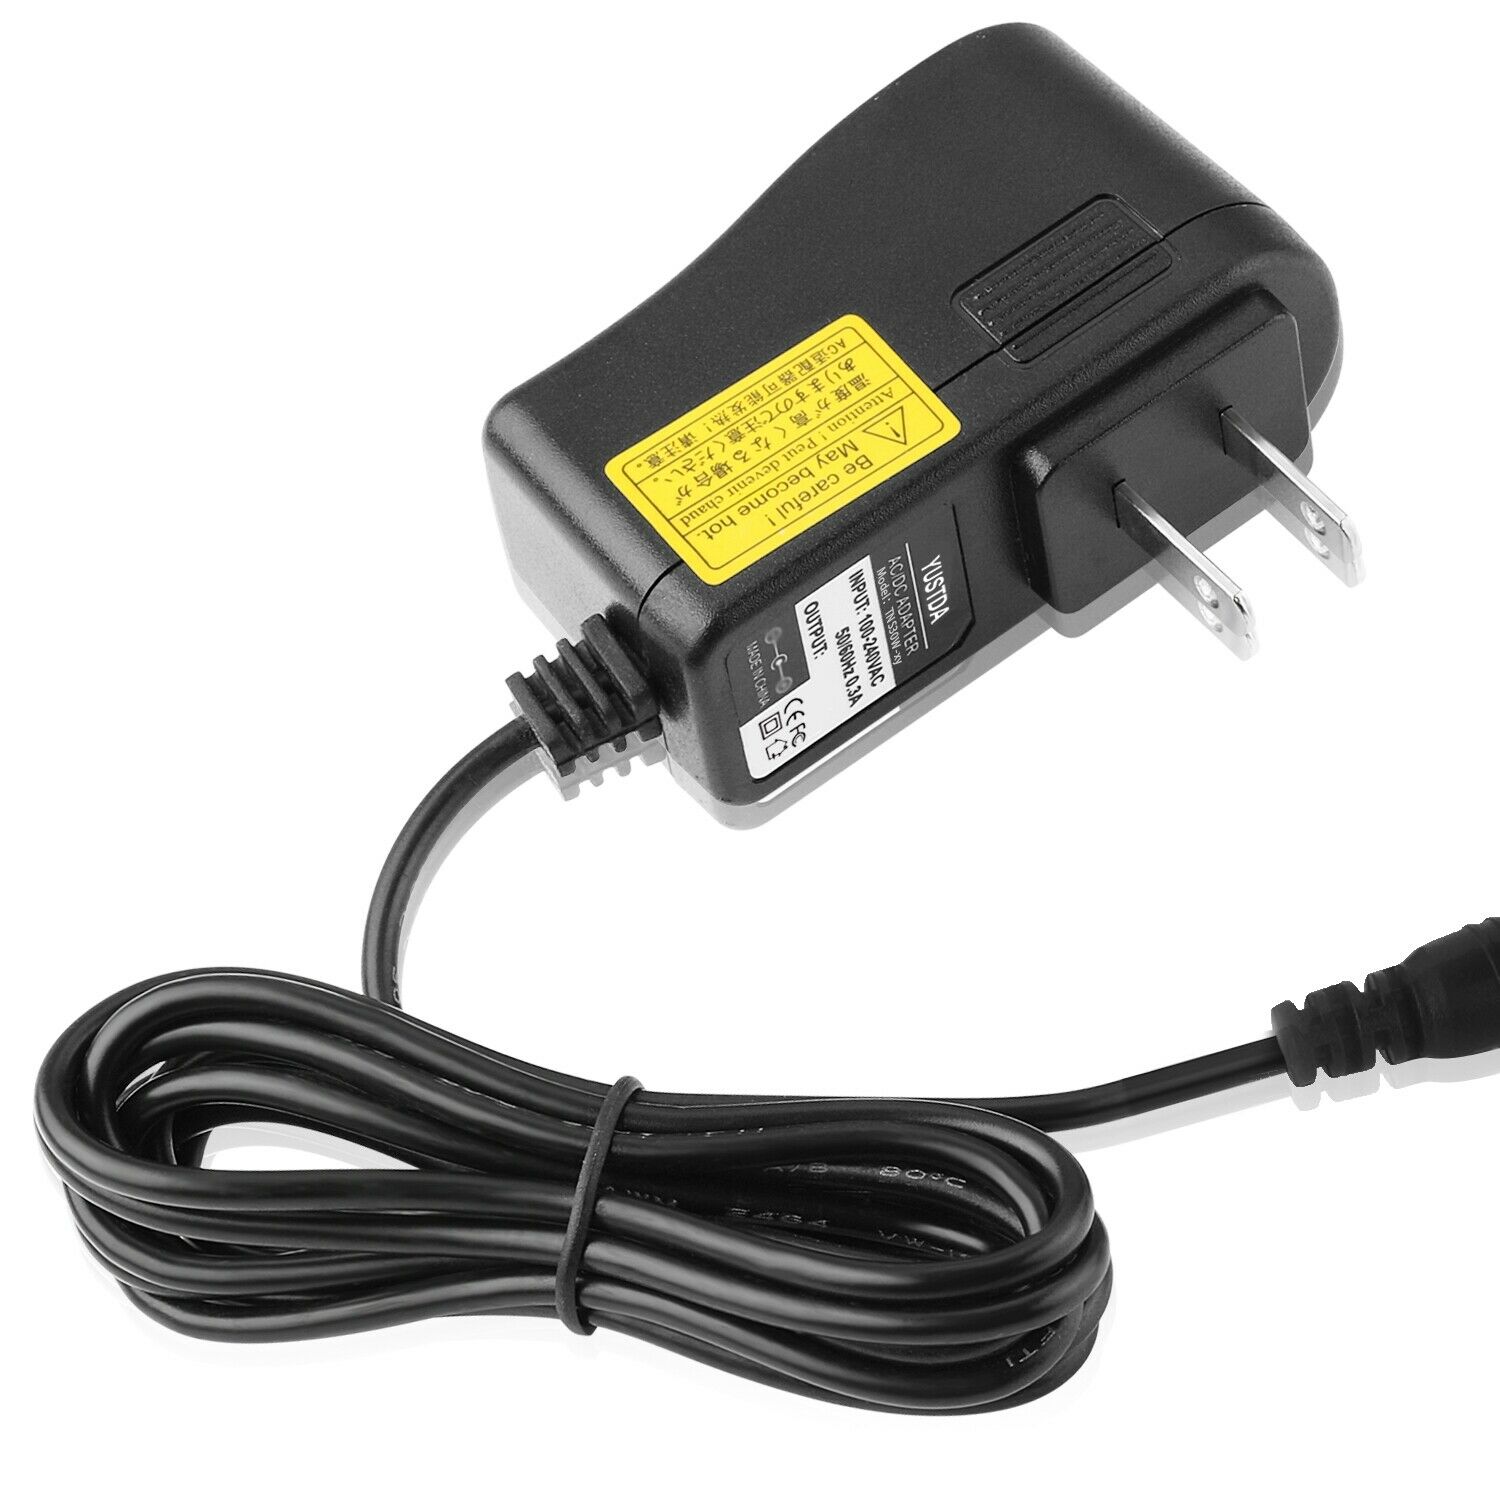 AC Adapter For Yamaha HPR-1000 12 Volt Ride-On Electric Toy Side by Side Hyper Features and Specification: Worldwide I